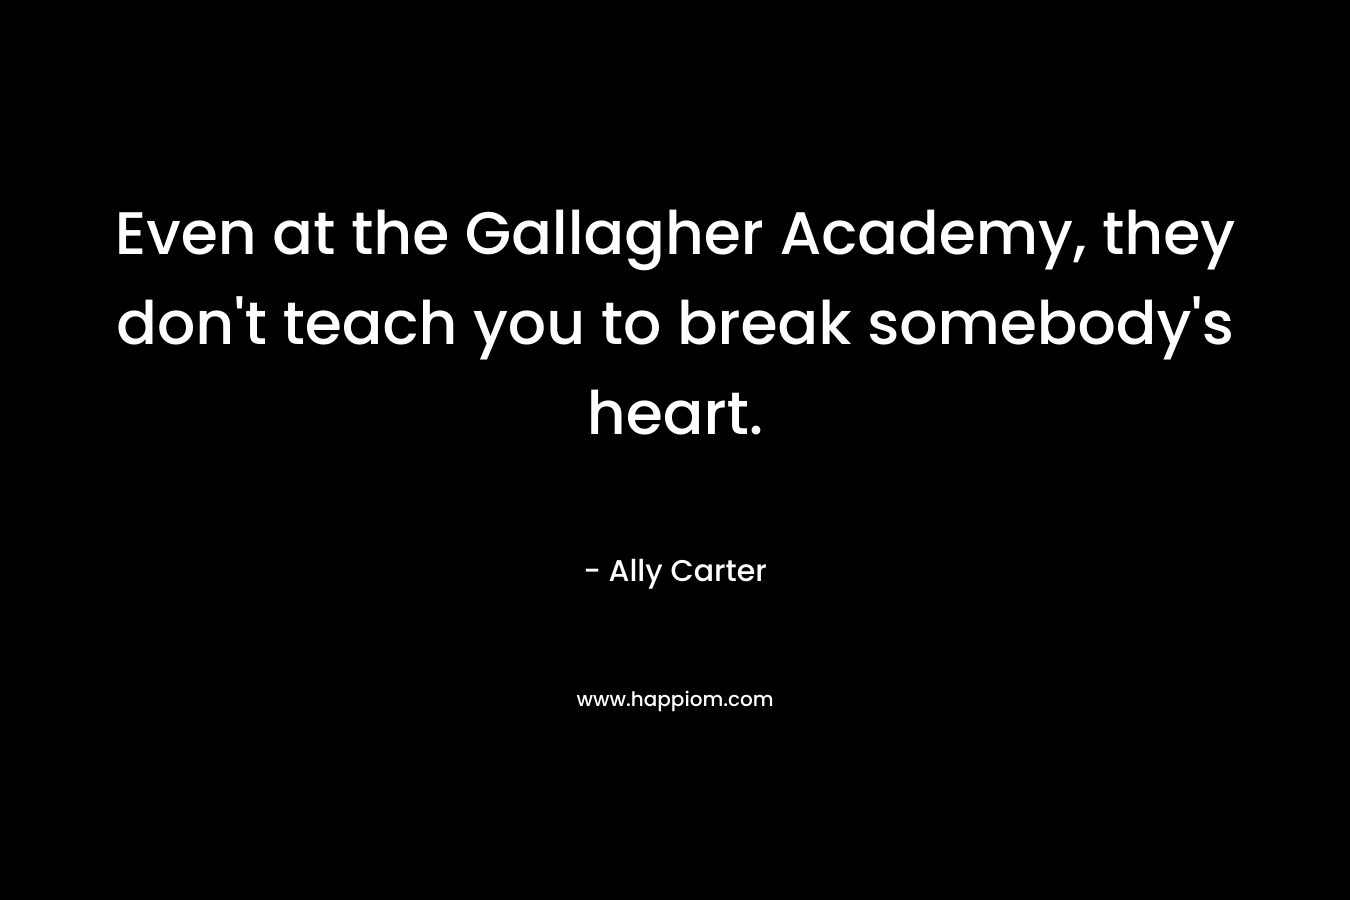 Even at the Gallagher Academy, they don’t teach you to break somebody’s heart. – Ally Carter